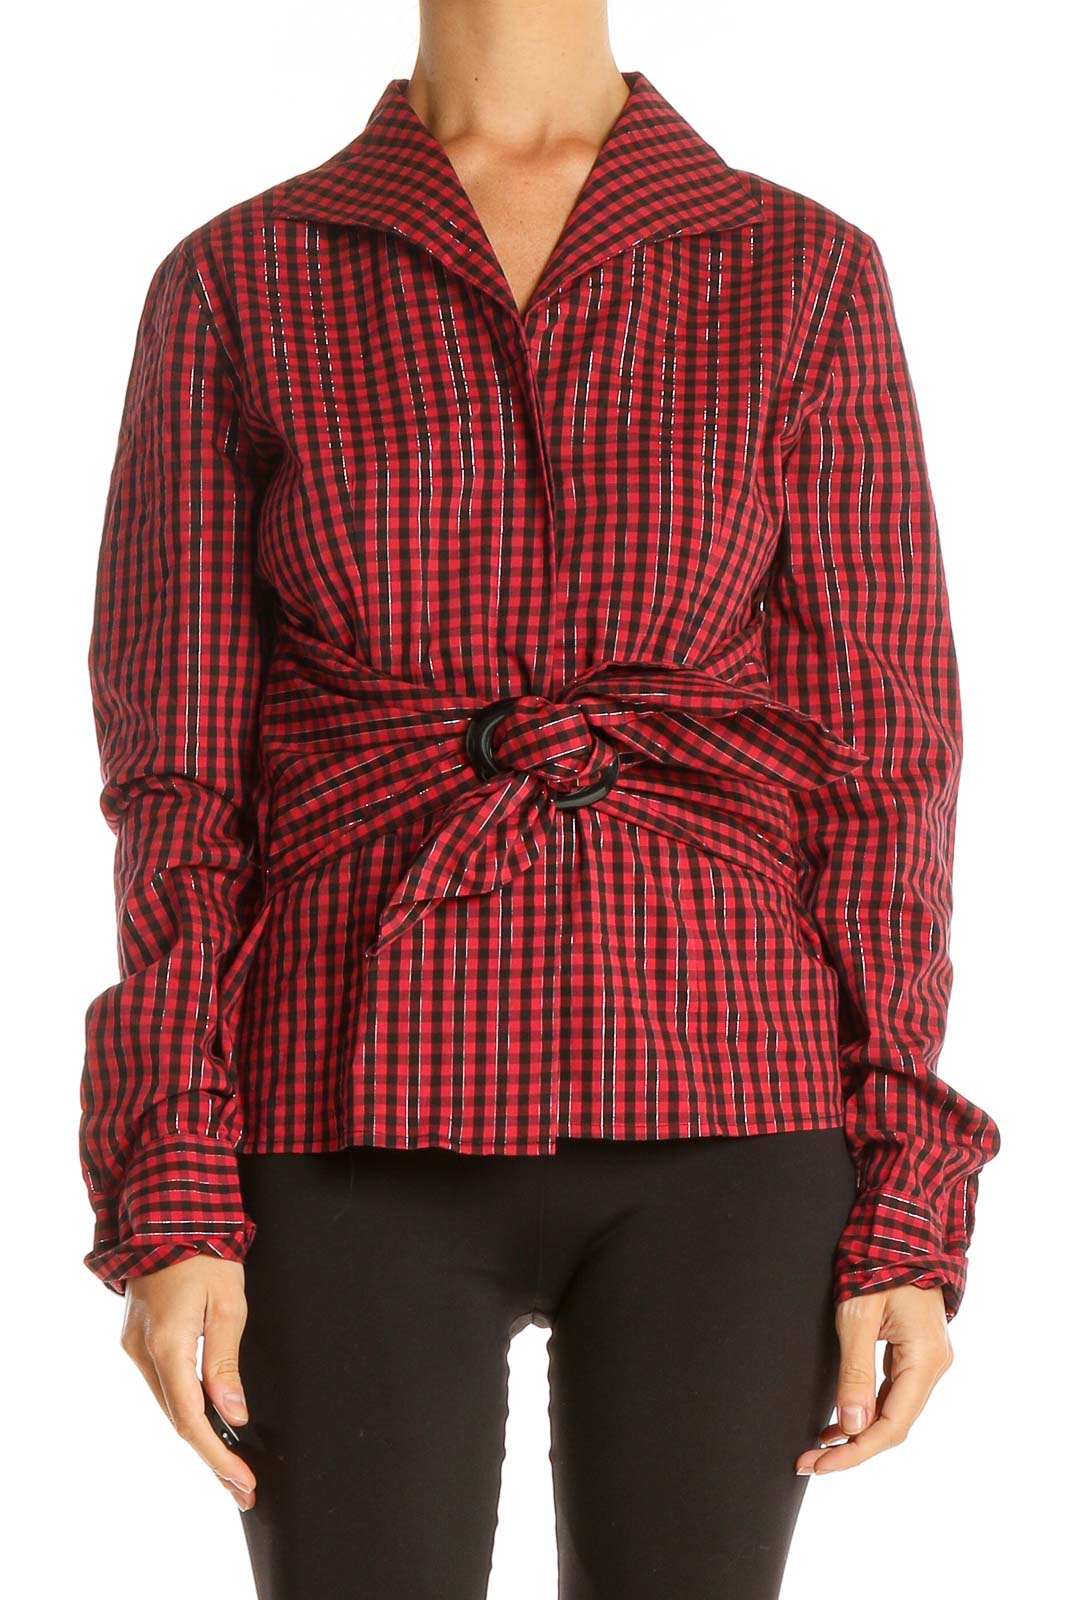 Red Checkered Retro Top Front